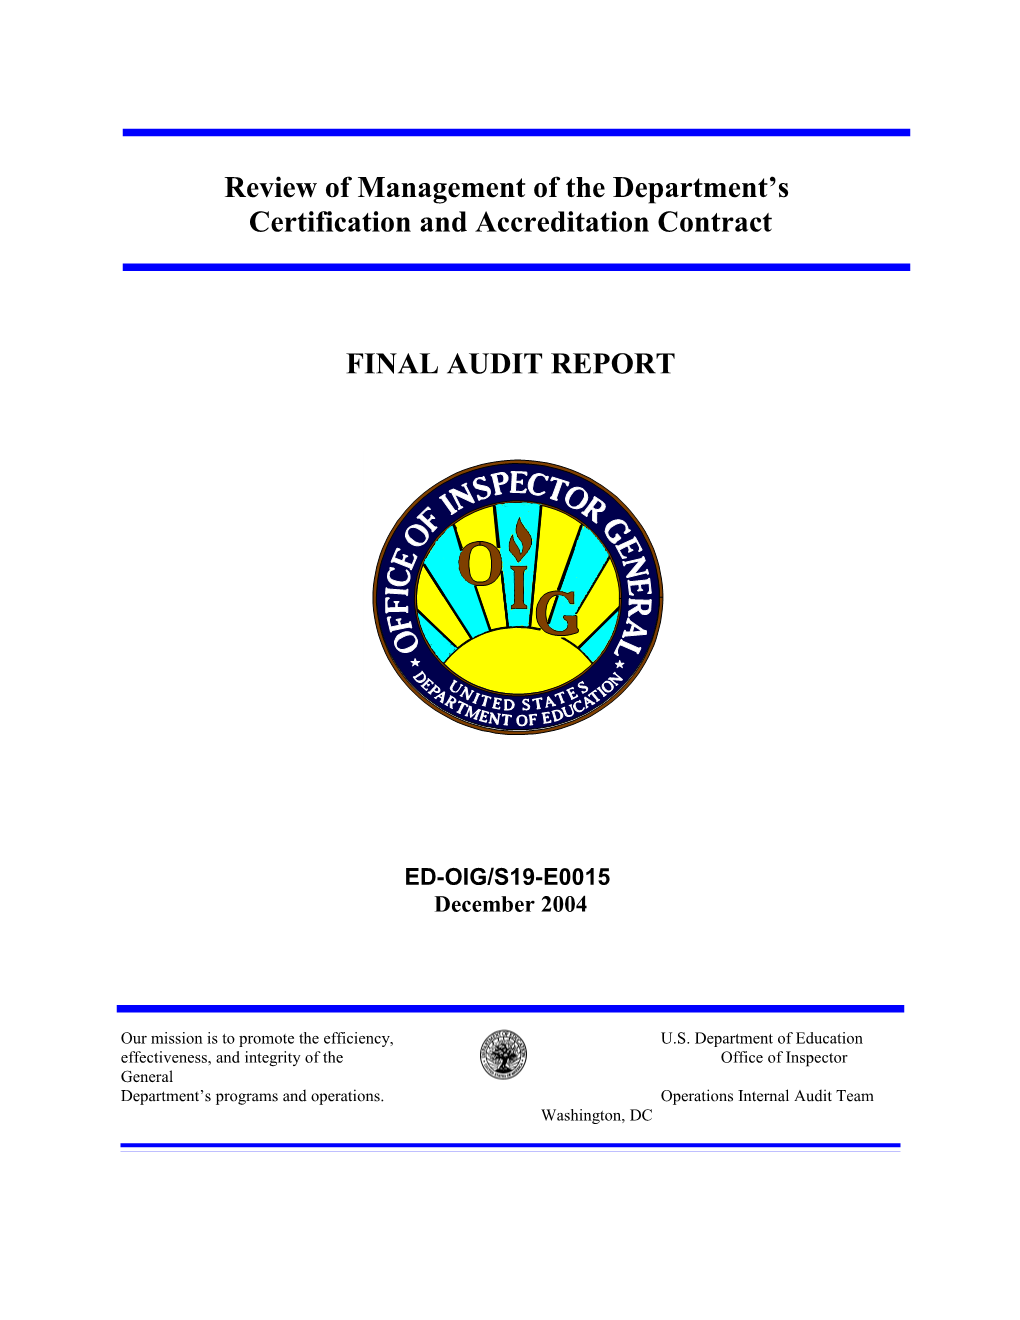 Review of Management of the Department's Certification and Accreditation Contract (Word)